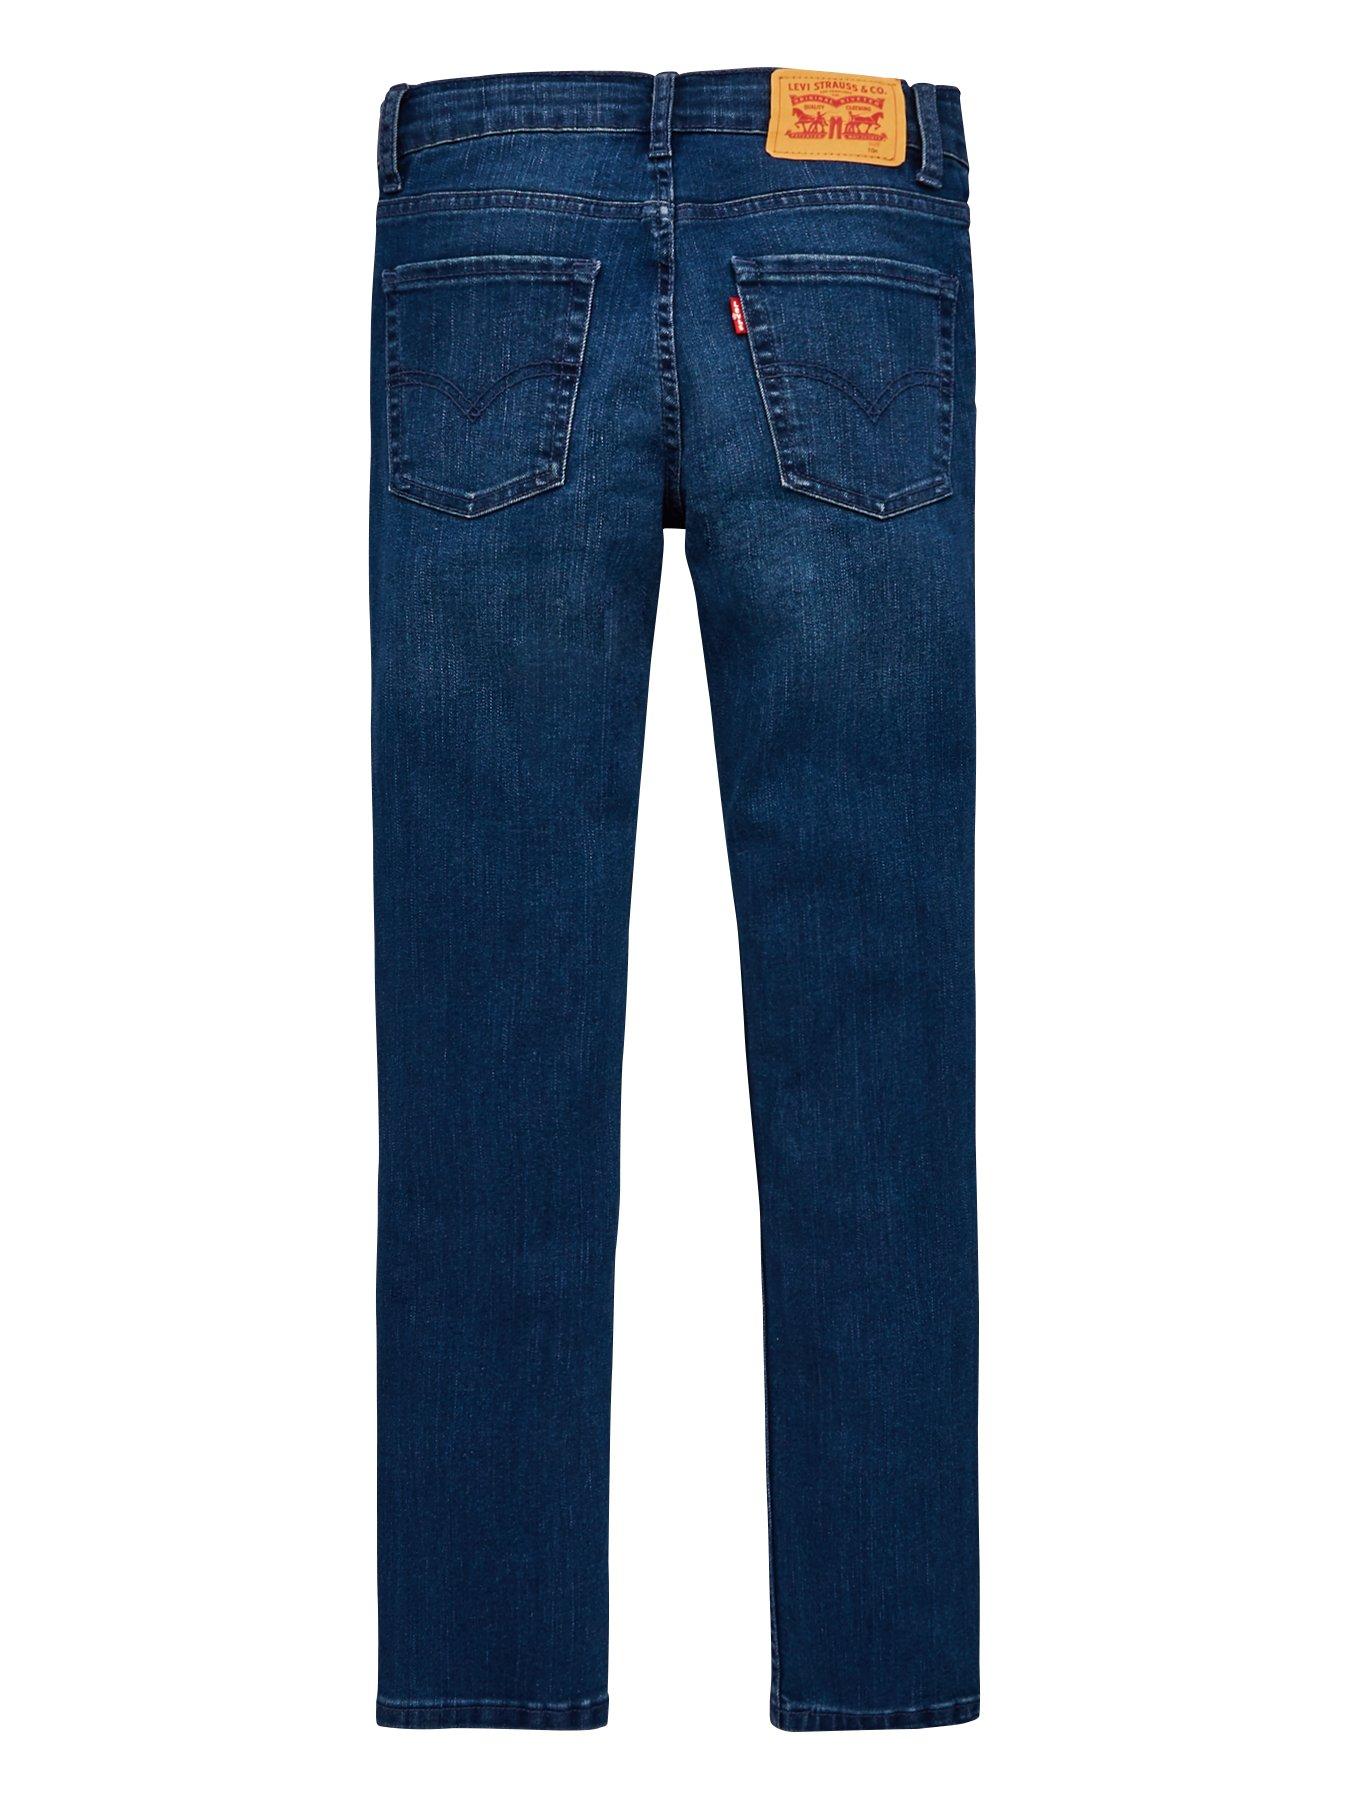 Levi's Boys 510 Skinny Fit Jeans - Mid Wash | very.co.uk